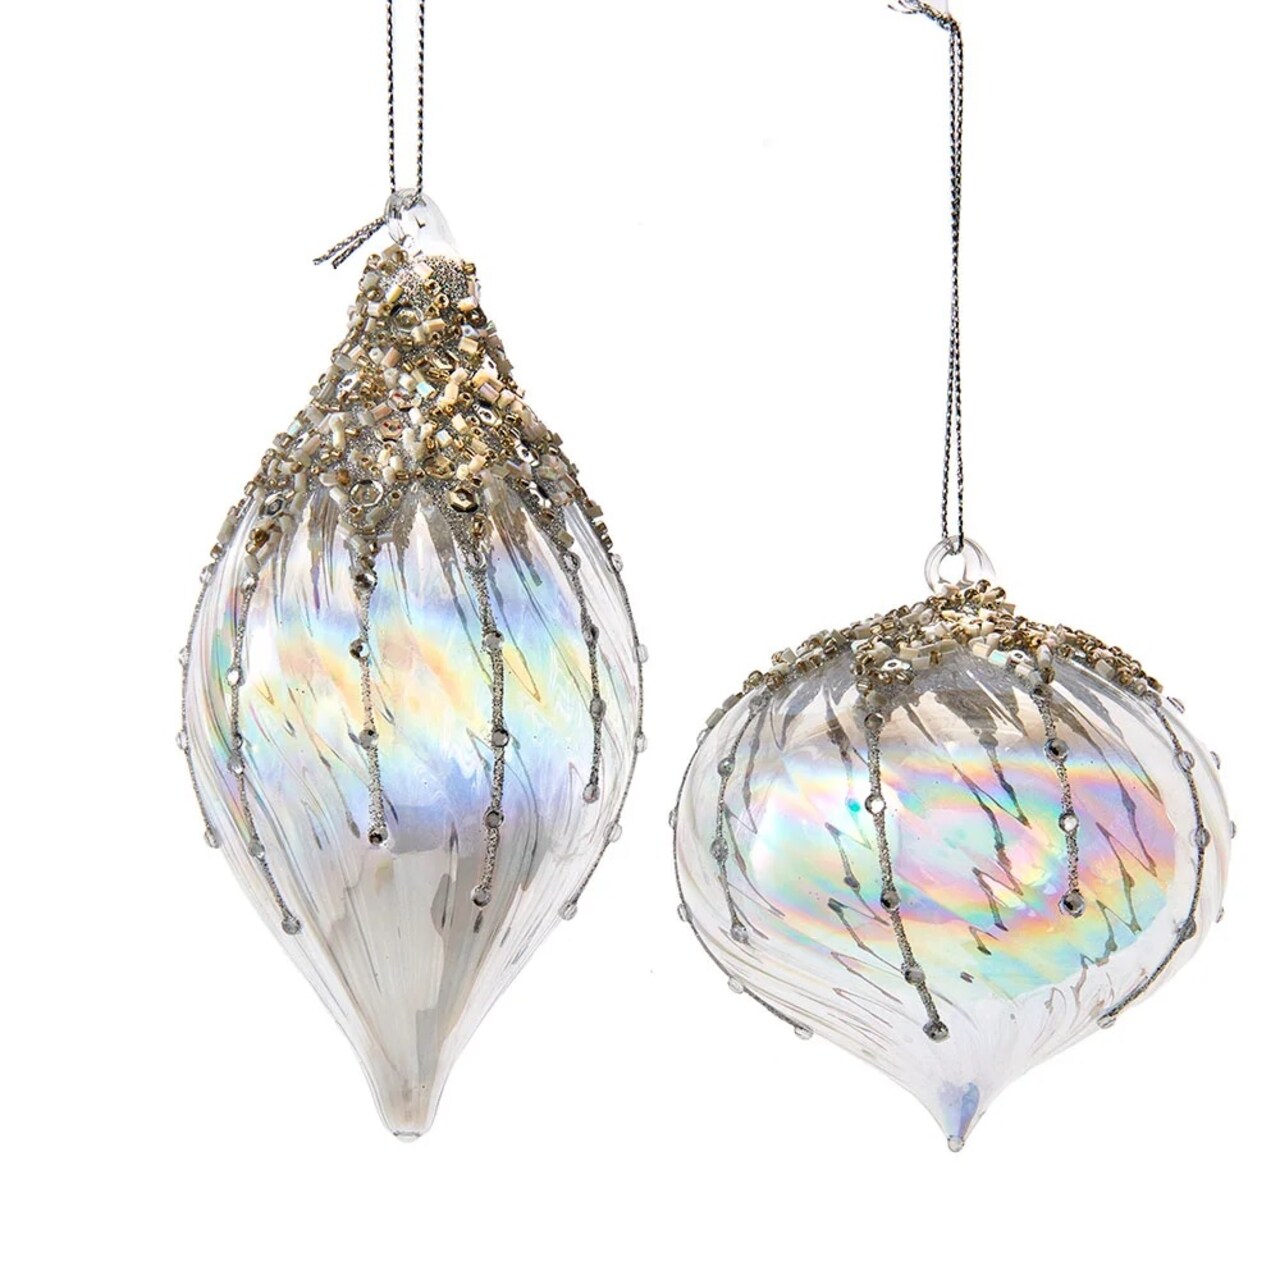 KSA Pack of 6 Iridescent Glass Onion and Finial Christmas Ornaments